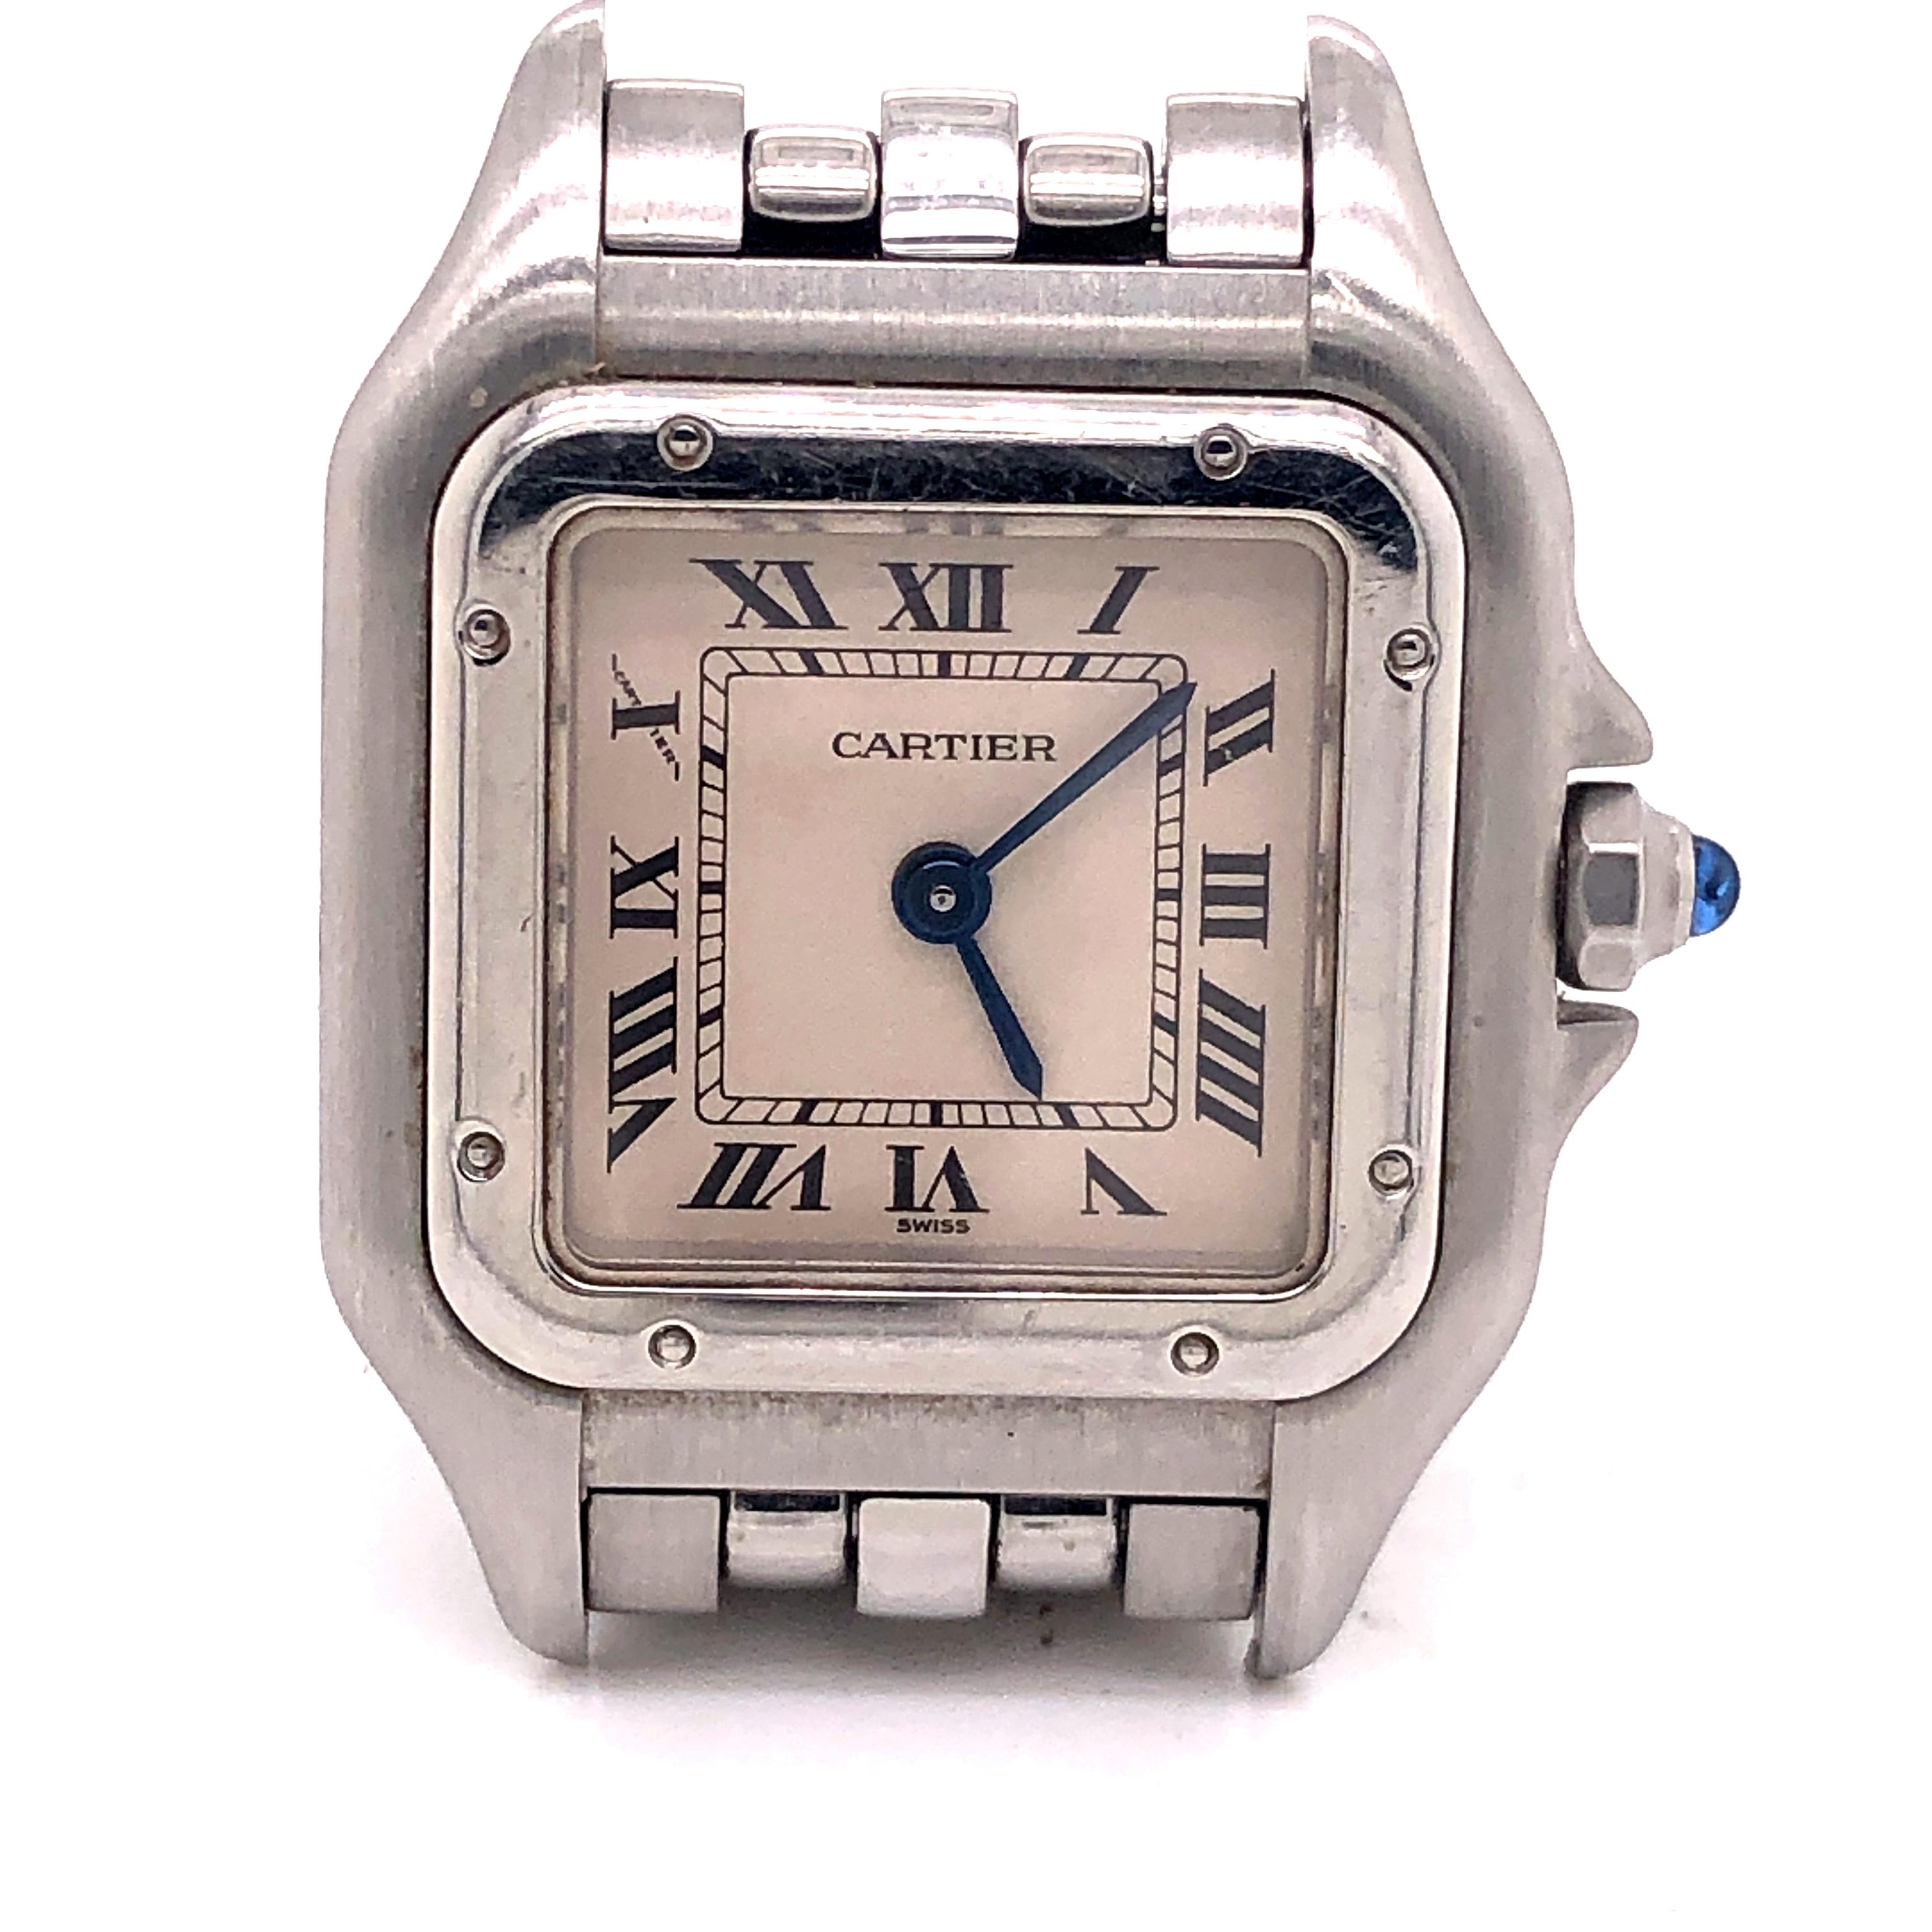 Gorgeous timeless Cartier Panthere  22 mm watch. Watch is in excellent working condition, keeping perfect time. Light wear is shown on case and strap. Back of watch still has original stickers. Fully hallmarked by designer. All photos taken under